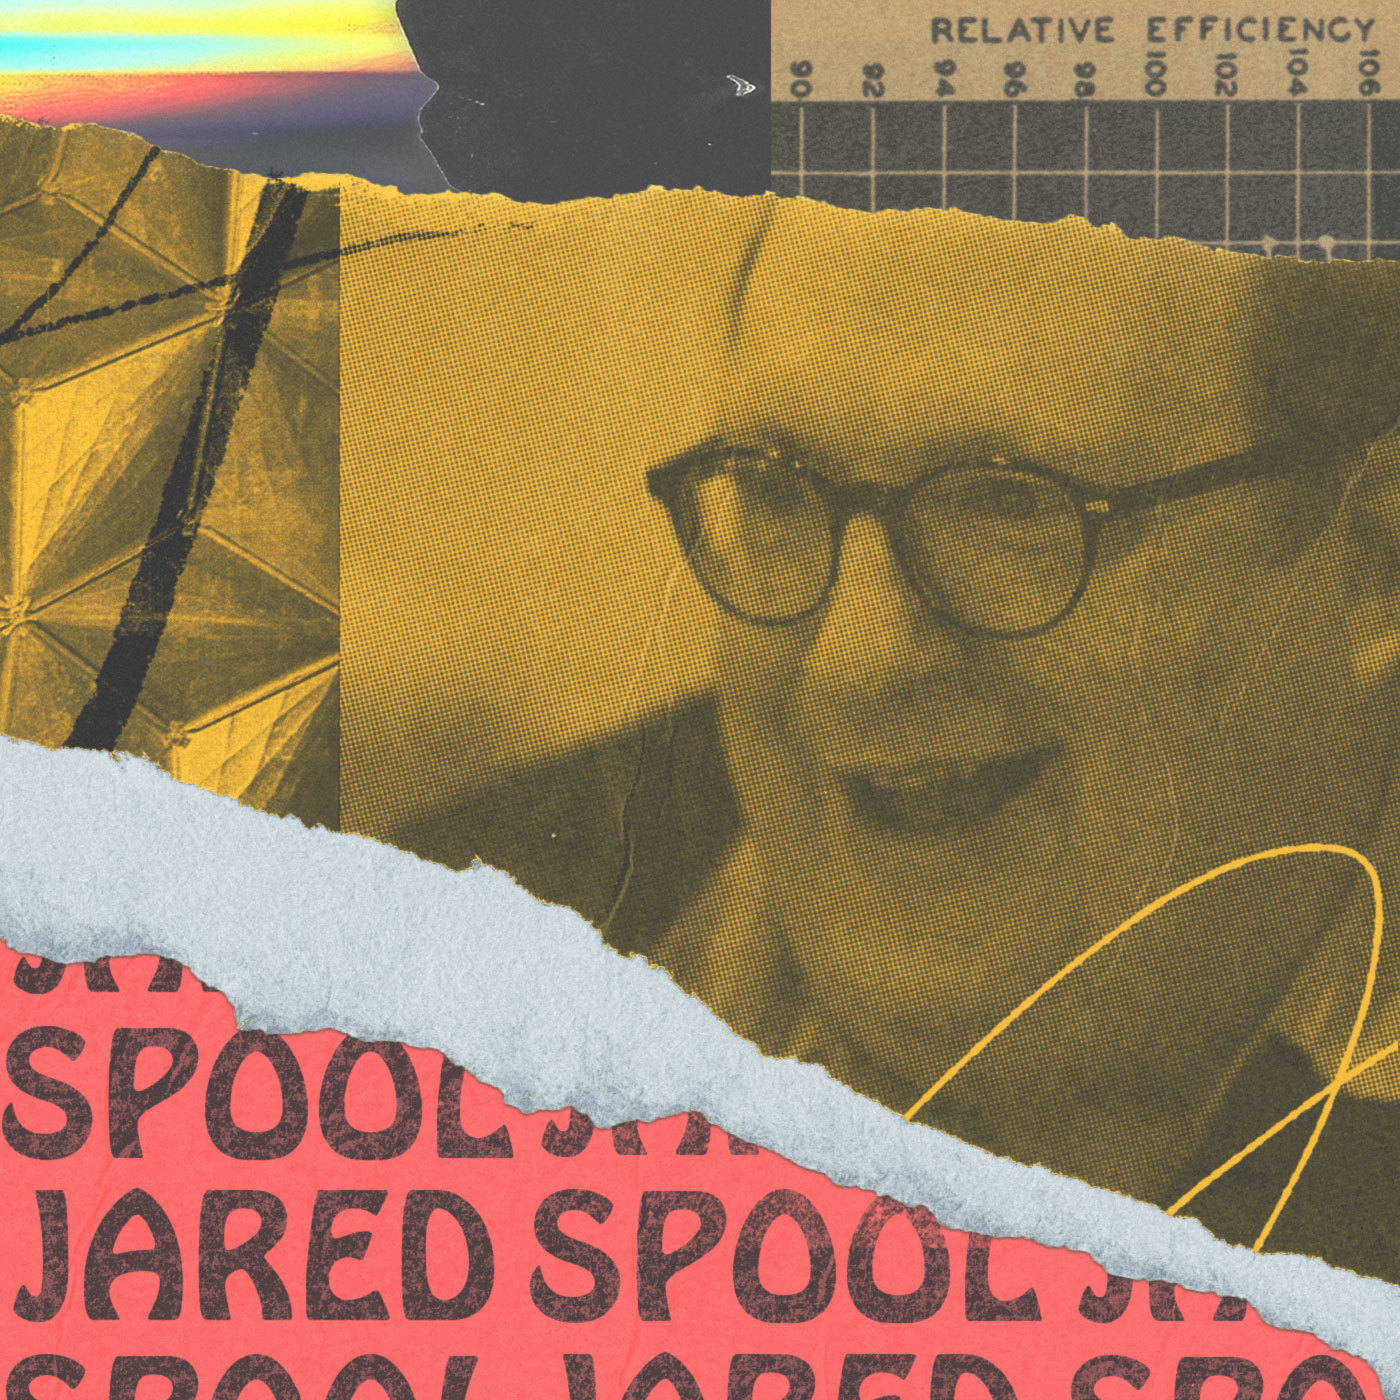 Design expert Jared Spool on teaching UX to the next generation